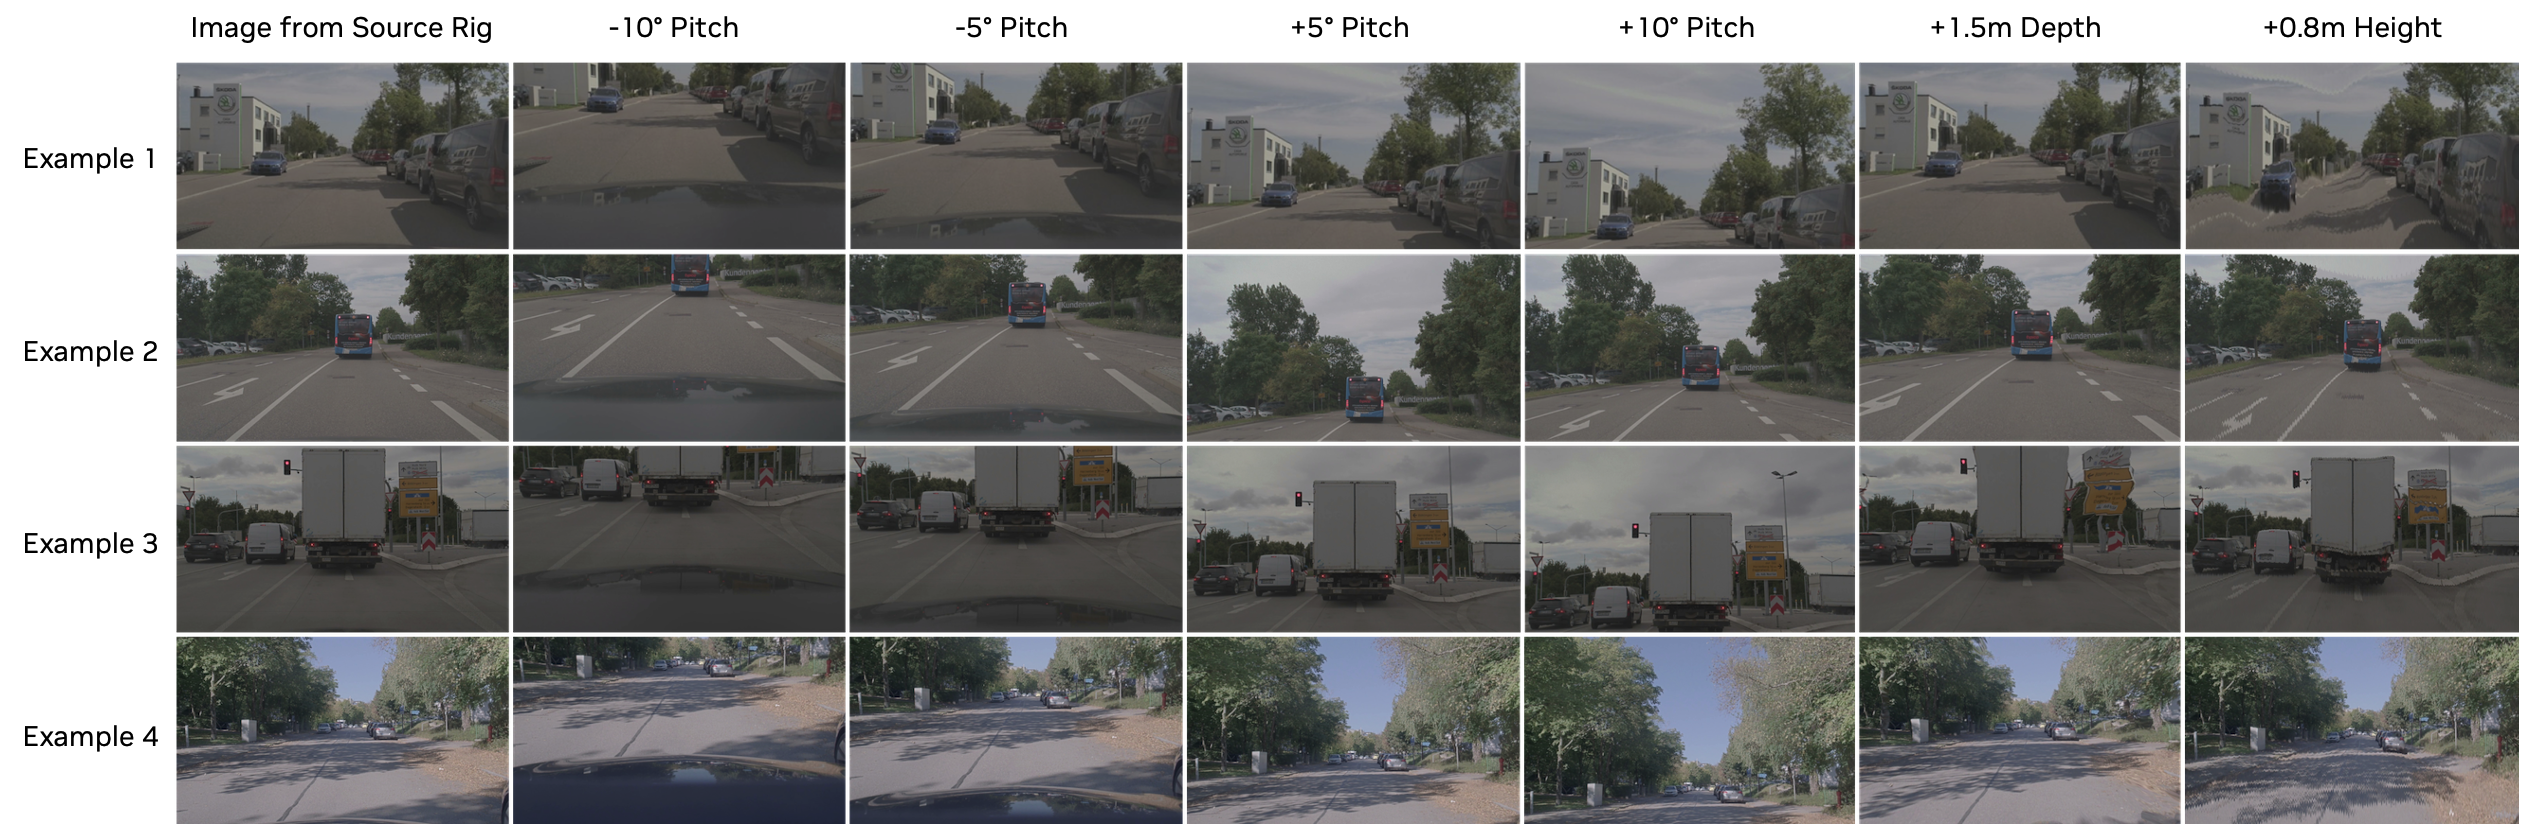 A grid of camera images from a vehicle’s point of view, each showing slight adjustments in camera pitch, depth, and height.